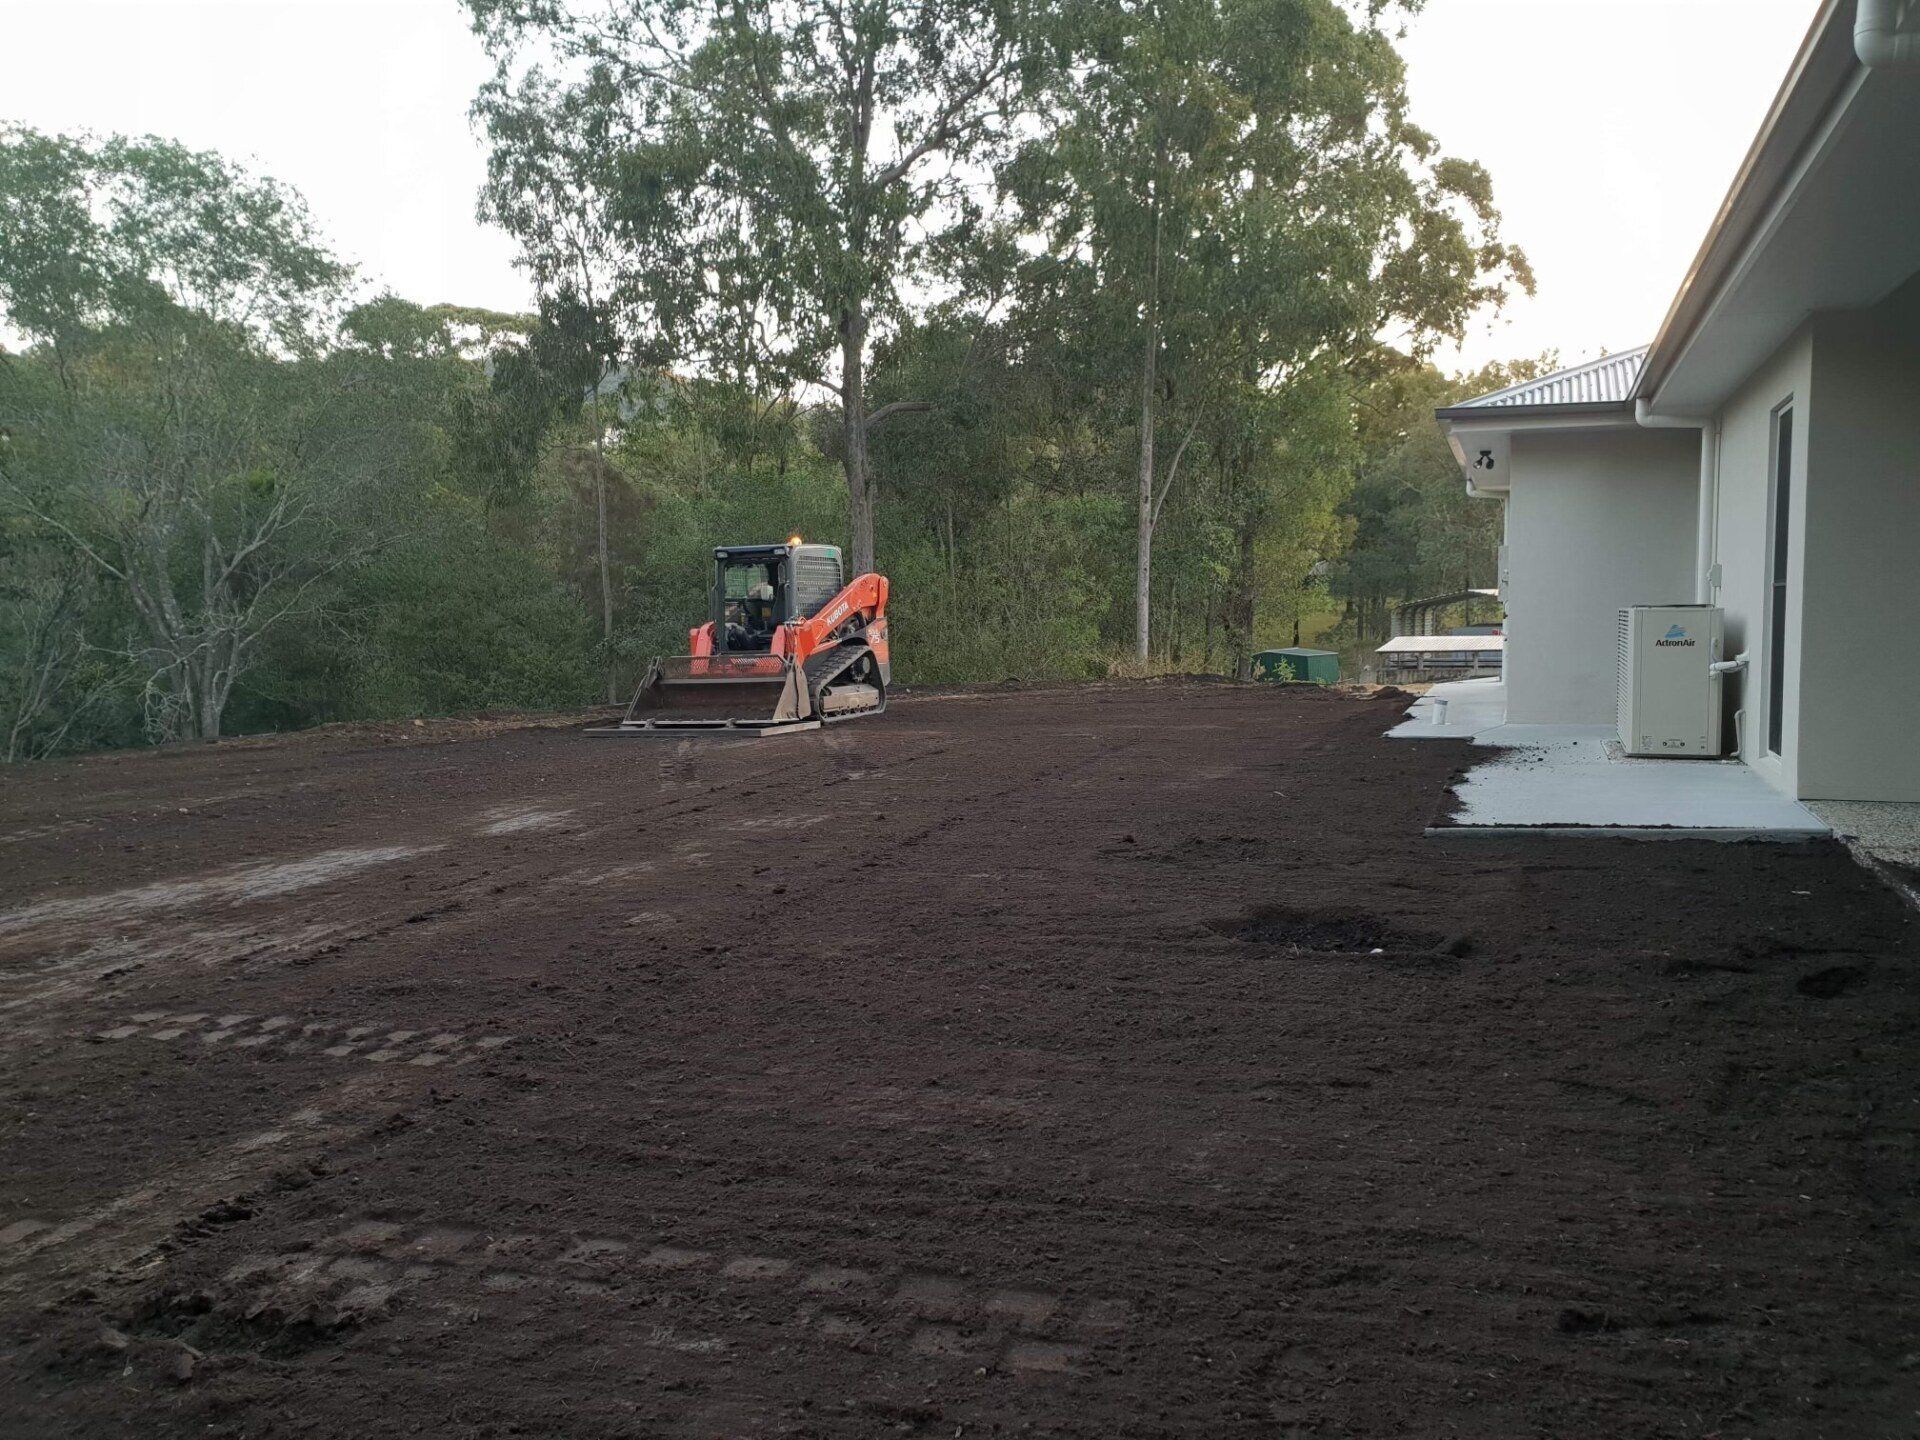 Machinery for Landscaping— Landscape Supplies In Carrara,QLD